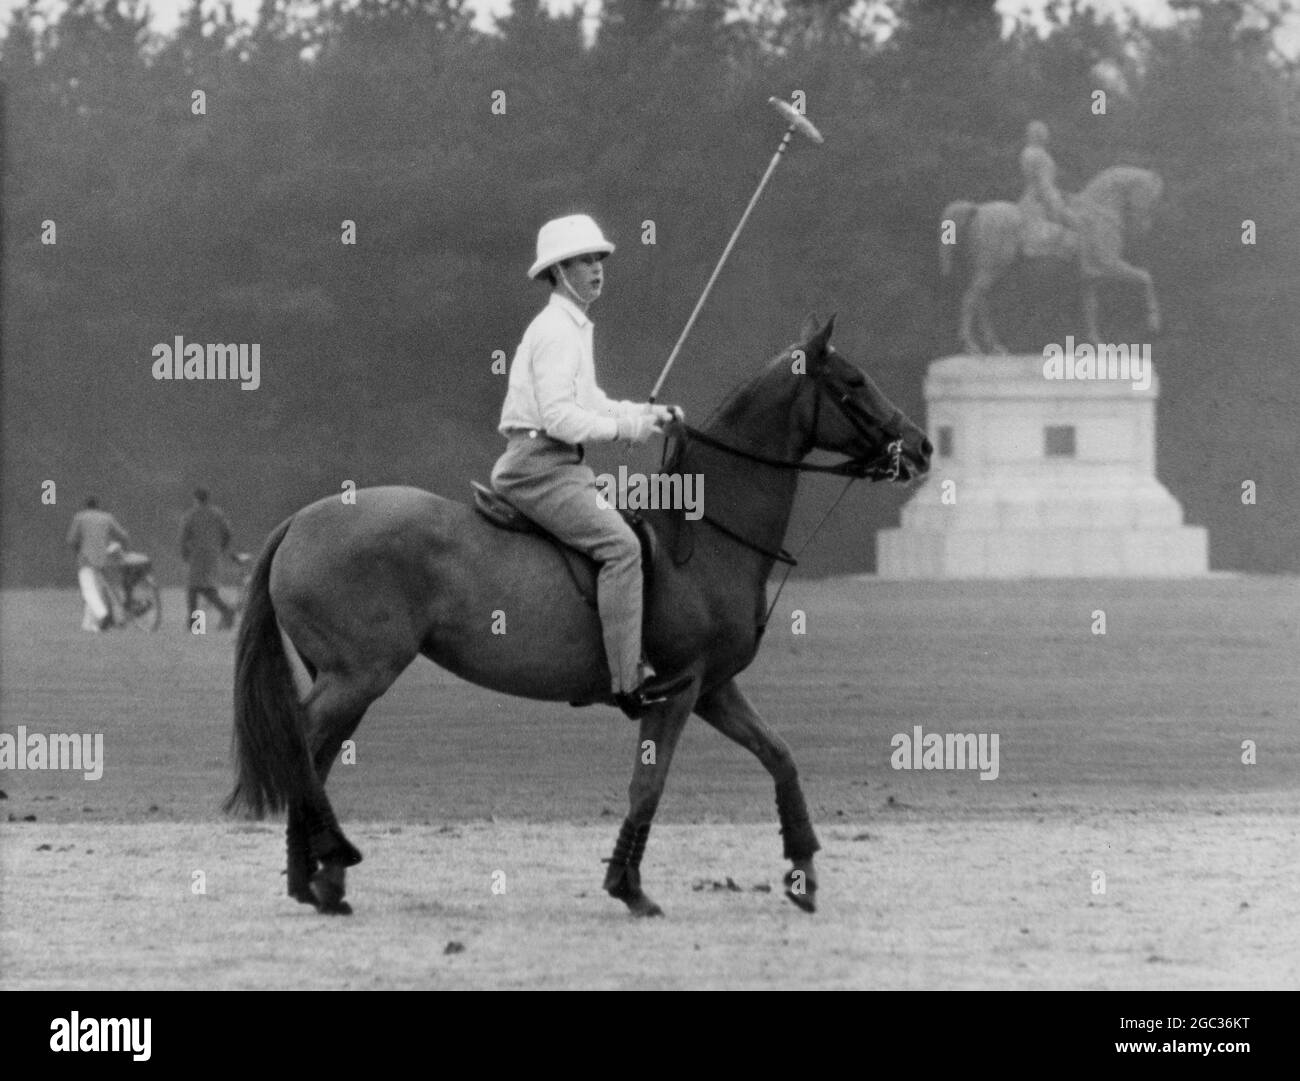 Prince Charles wearing white topee and jodhpurs sits on his pony during polo practice on Smith's Lawn near Windsor Castle April 1964 Stock Photo